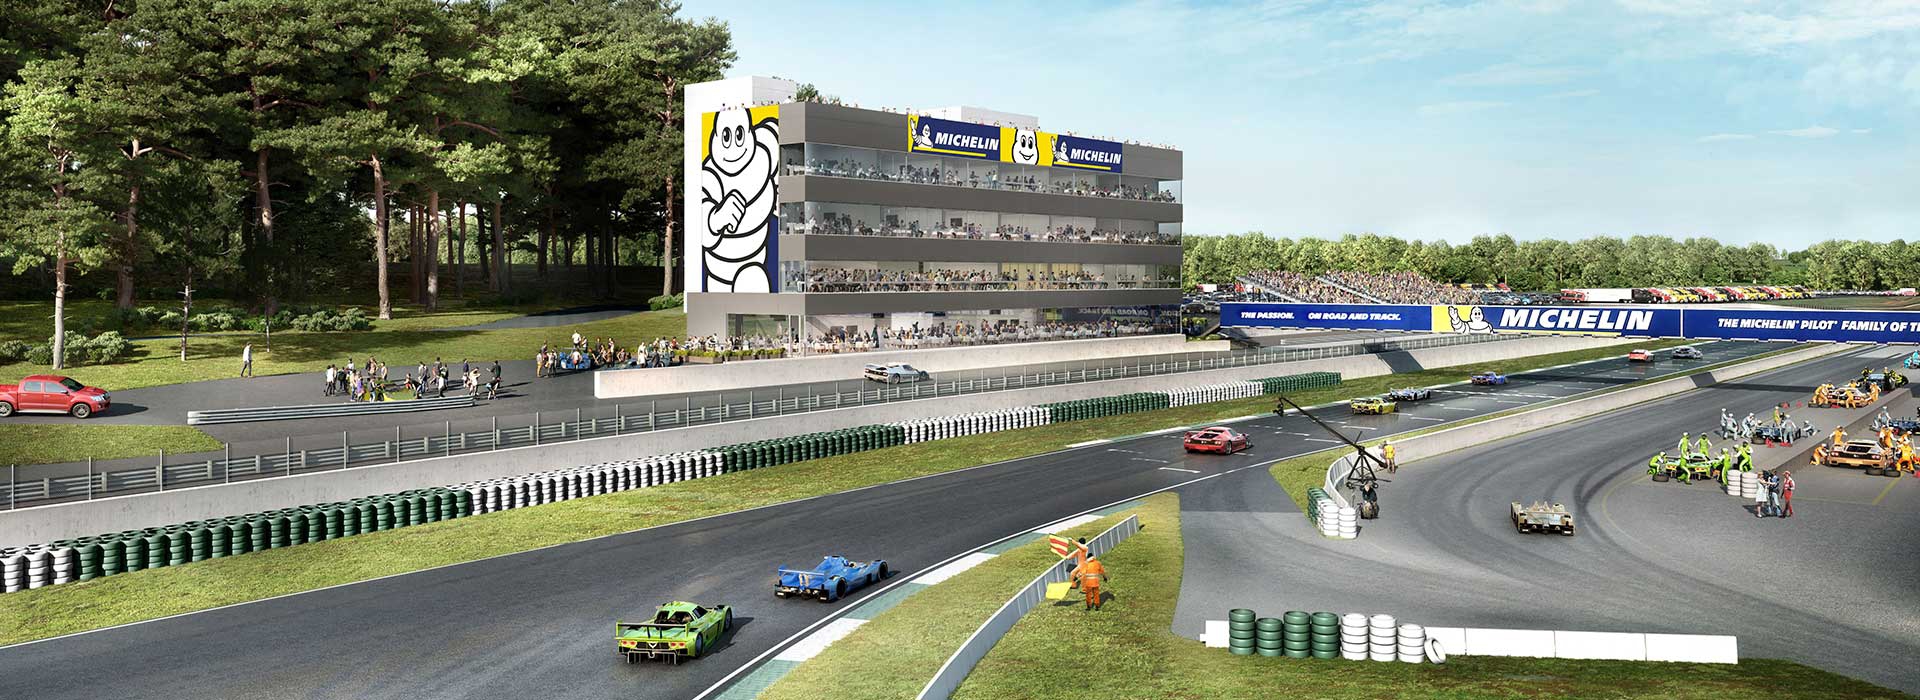 Michelin And Road Atlanta Announce Naming Rights Agreement To Begin in 2019